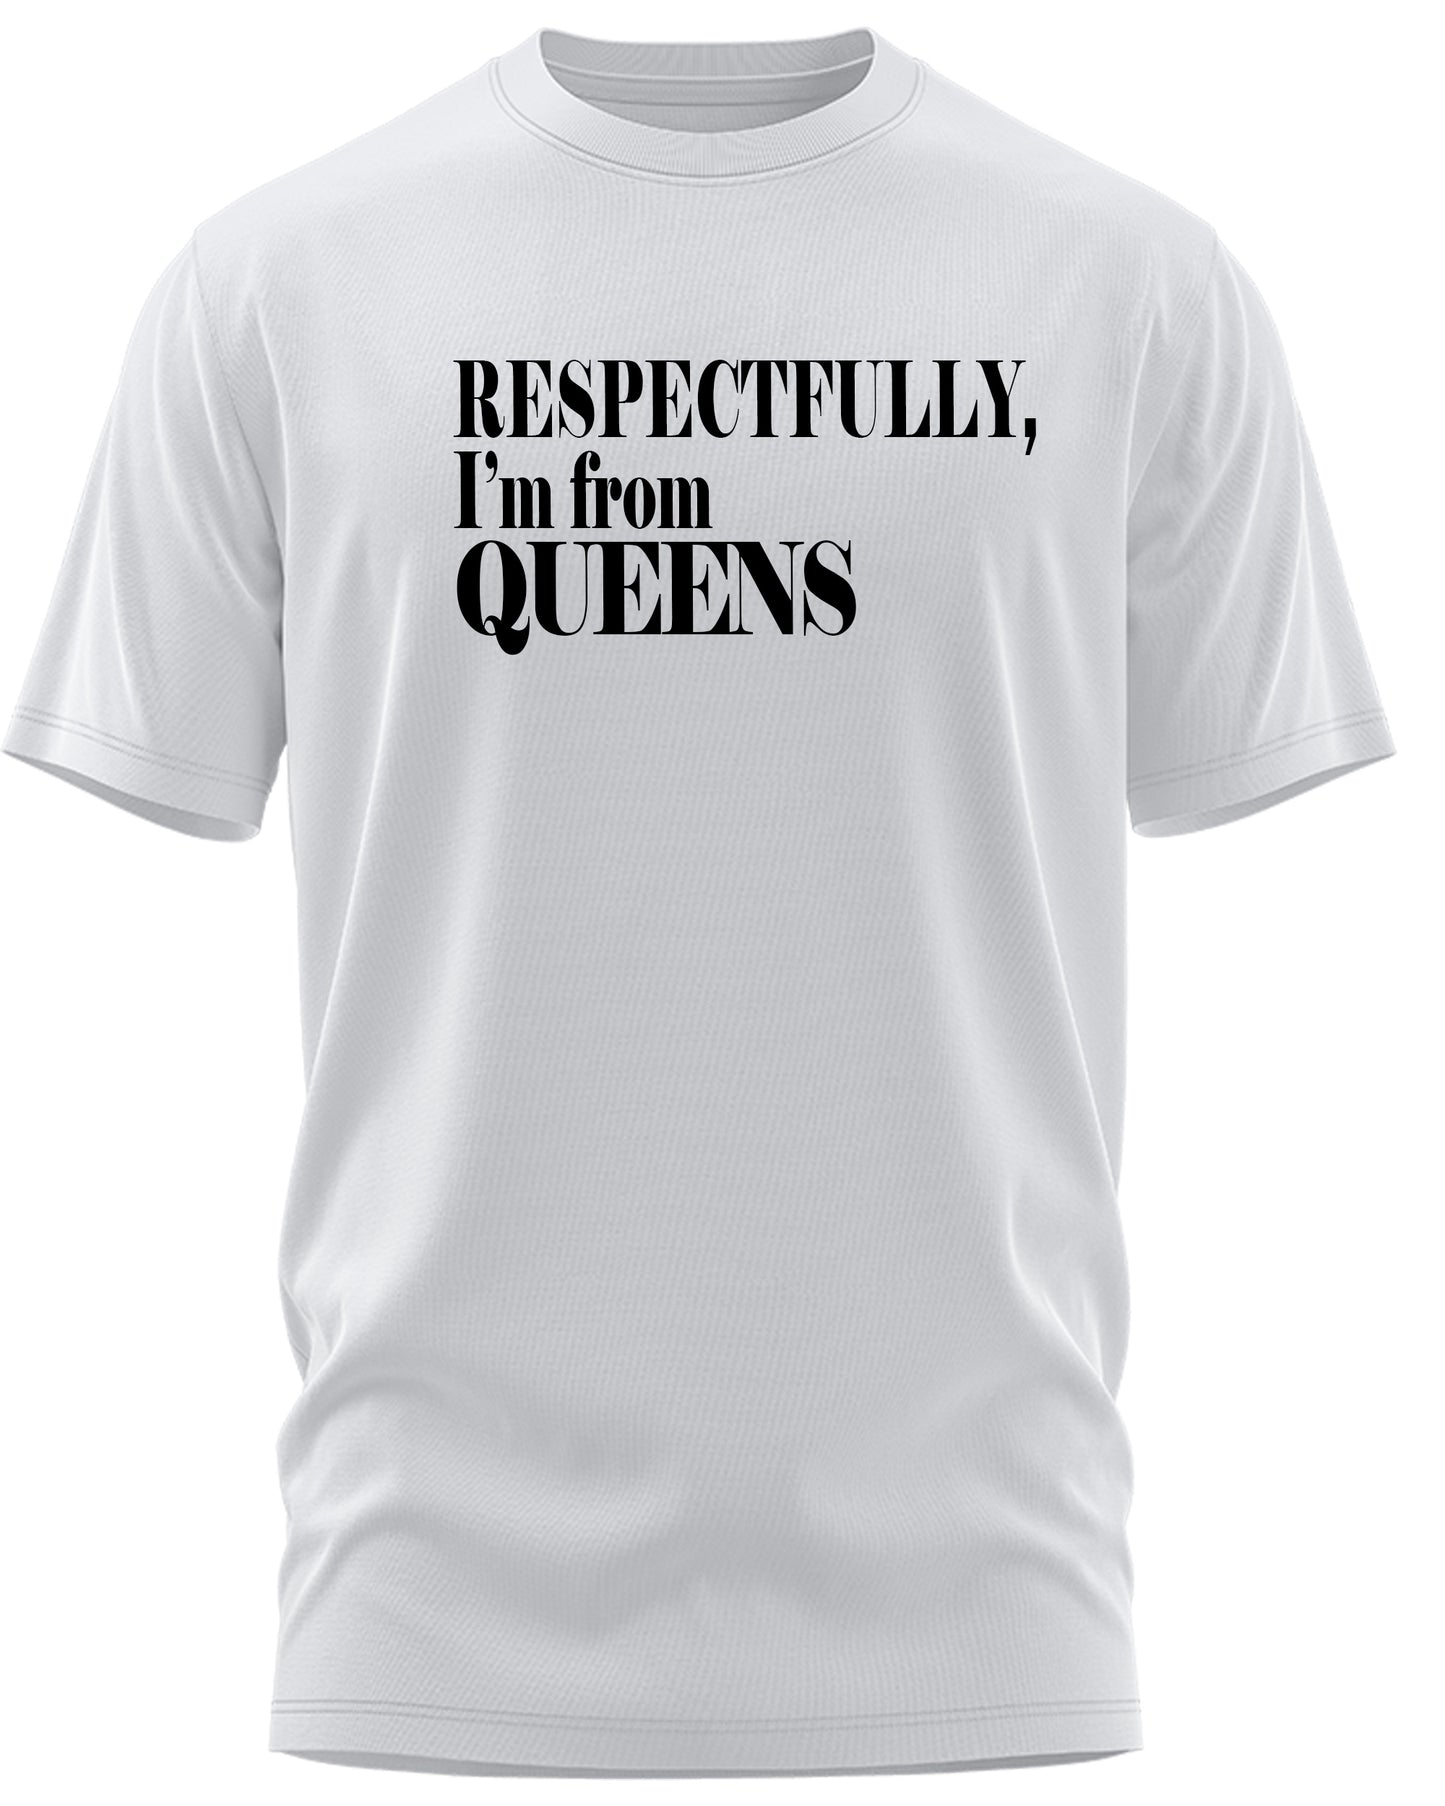 Respectfully I'm from Queens t-shirt